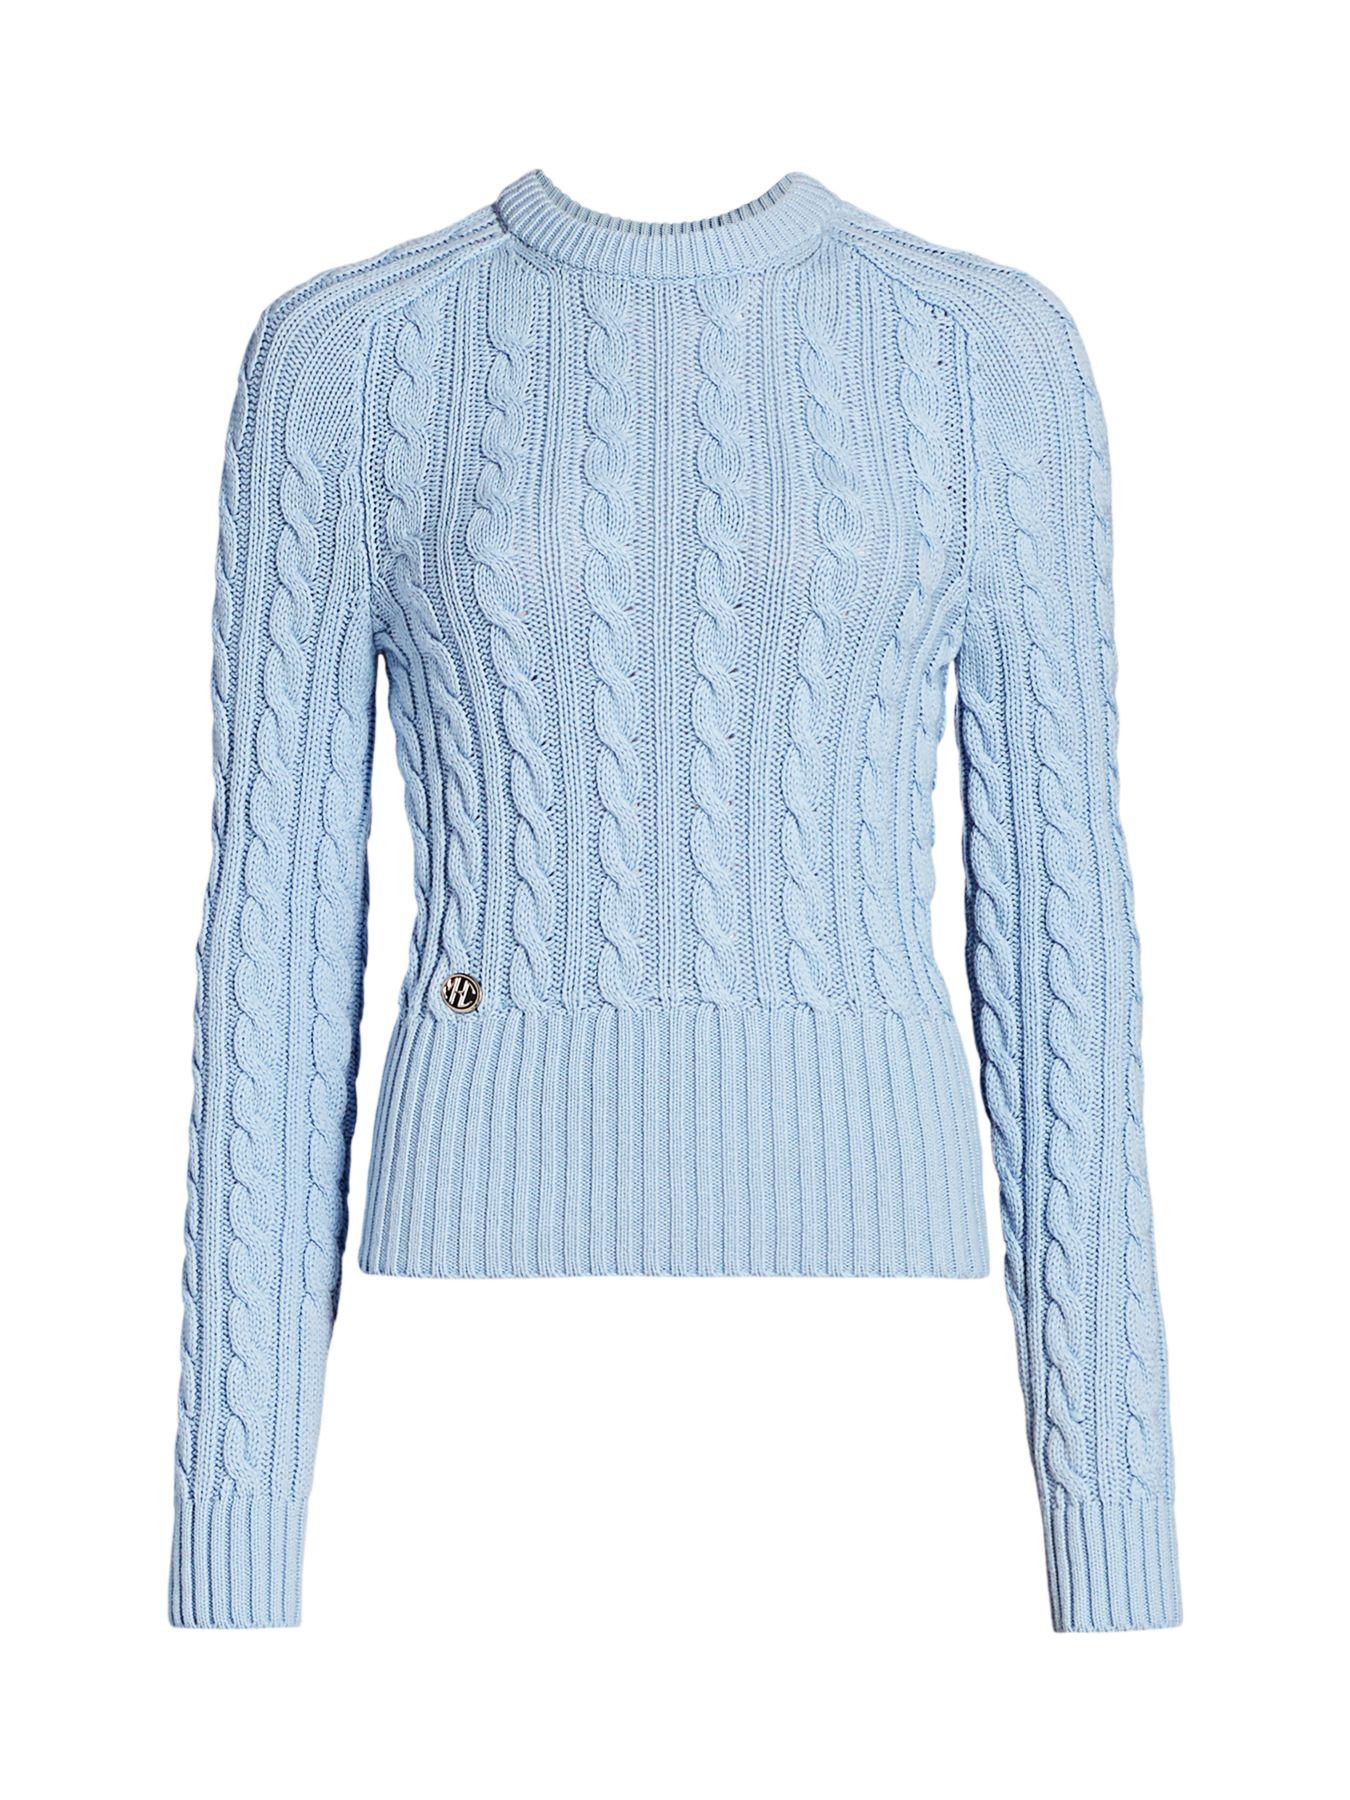 Michael Kors Cable-knit Cashmere Sweater in Sky (Blue) - Lyst